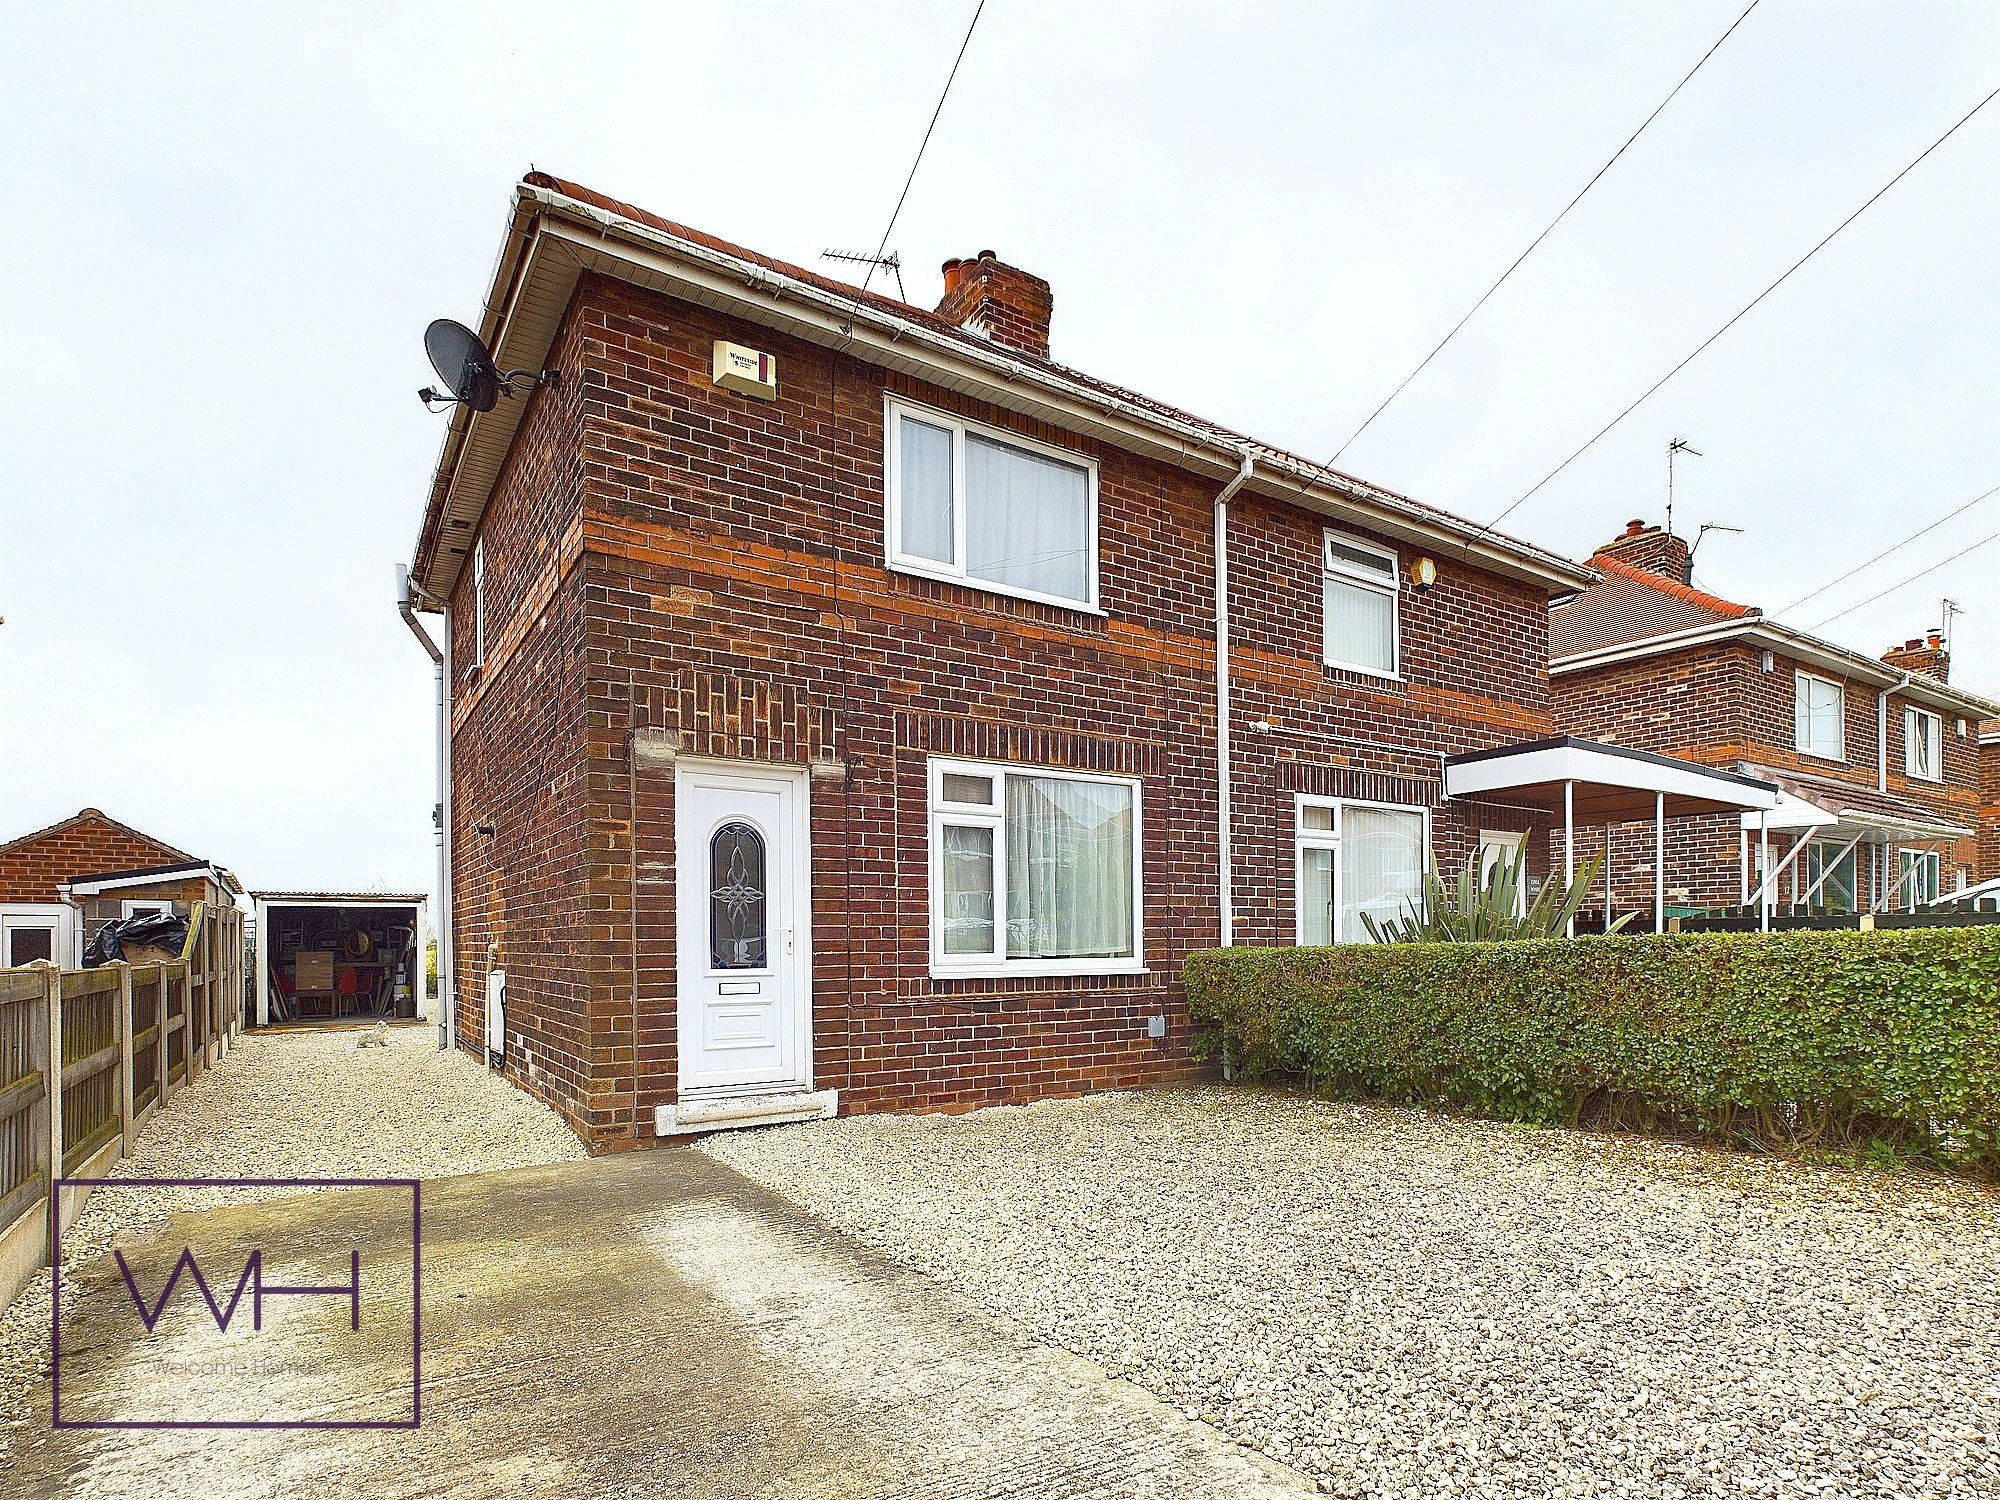 Town View Avenue, Scawsby, Doncaster, DN5 7UF